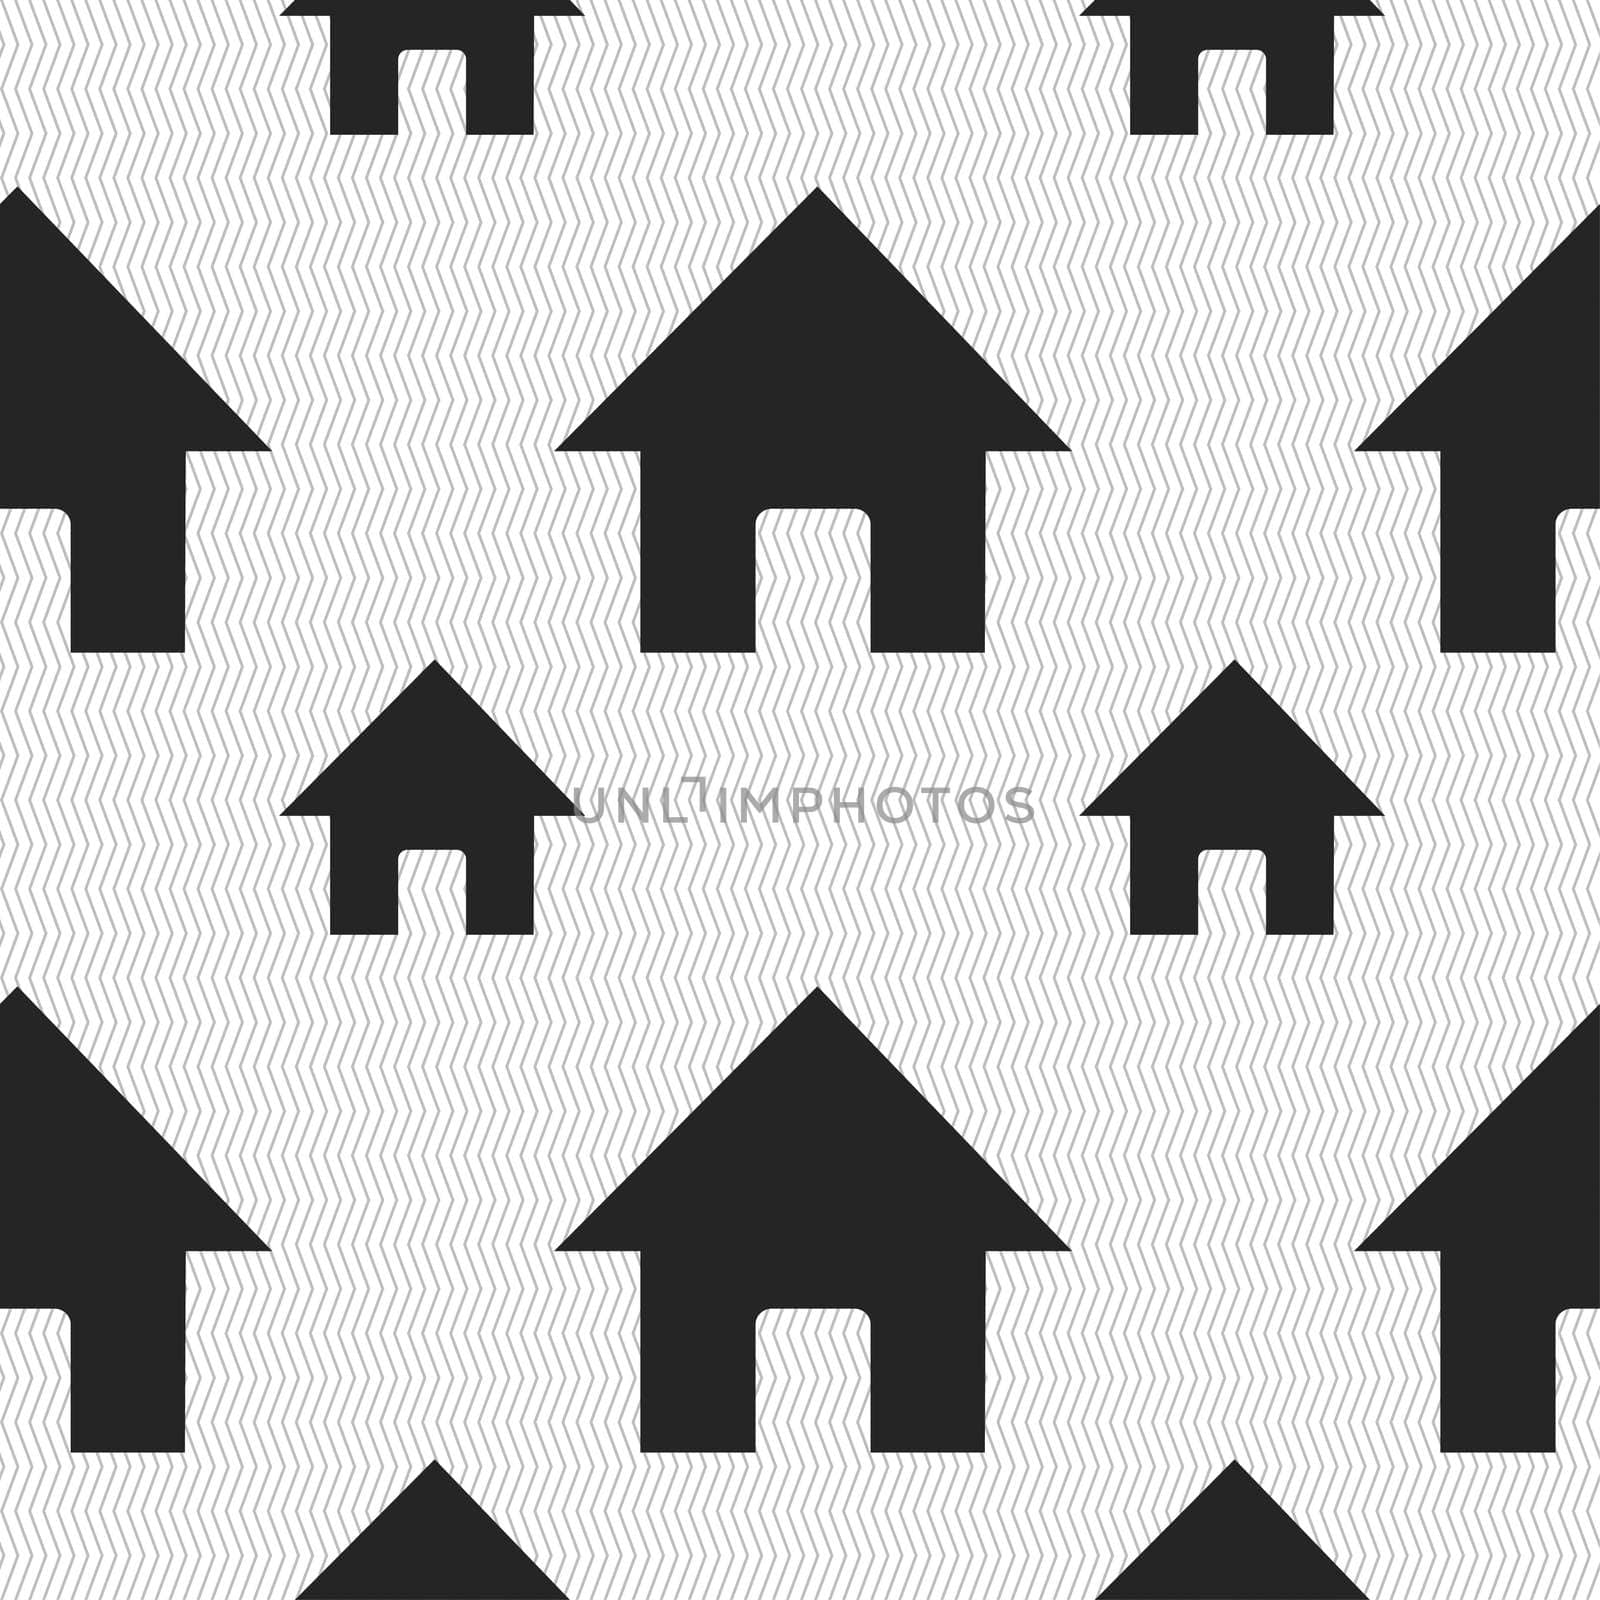 Home, Main page icon sign. Seamless pattern with geometric texture. illustration